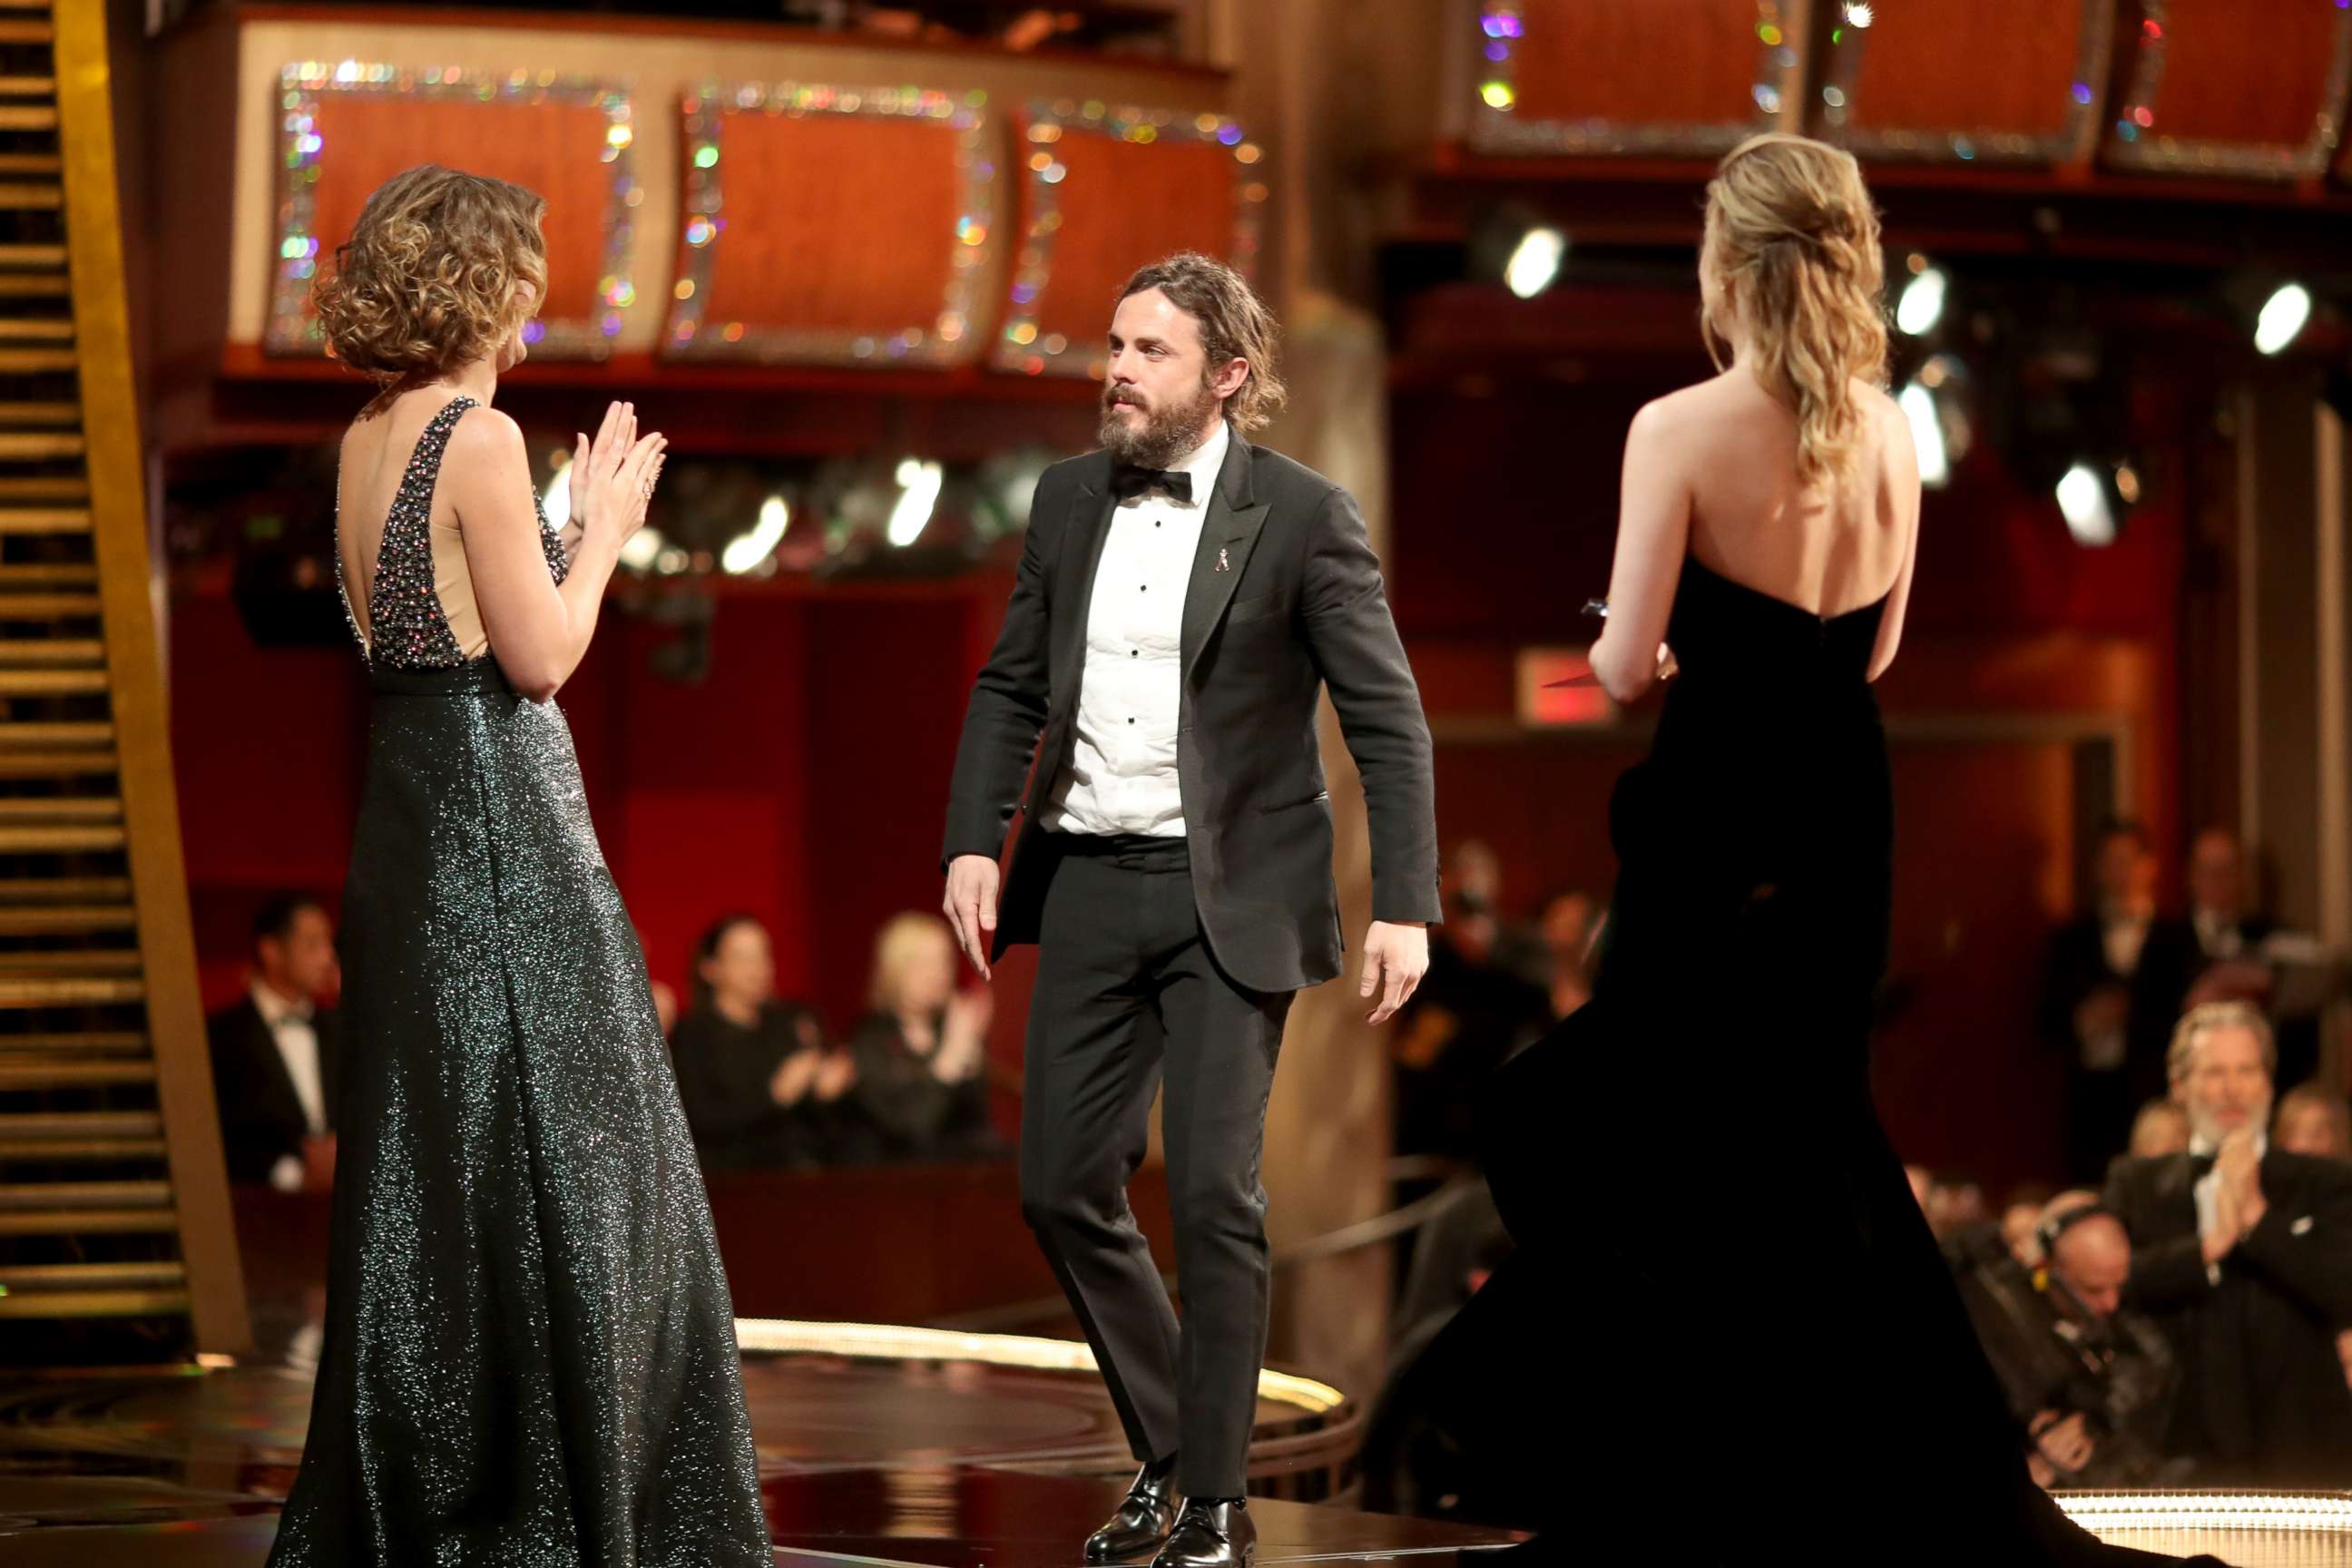 PHOTO: Casey Affleck accepts the Best Actor award for 'Manchester by the Sea' from actor Brie Larson onstage during the 89th Annual Academy Awards at Hollywood and Highland Center on Feb. 26, 2017 in Hollywood, Calif.